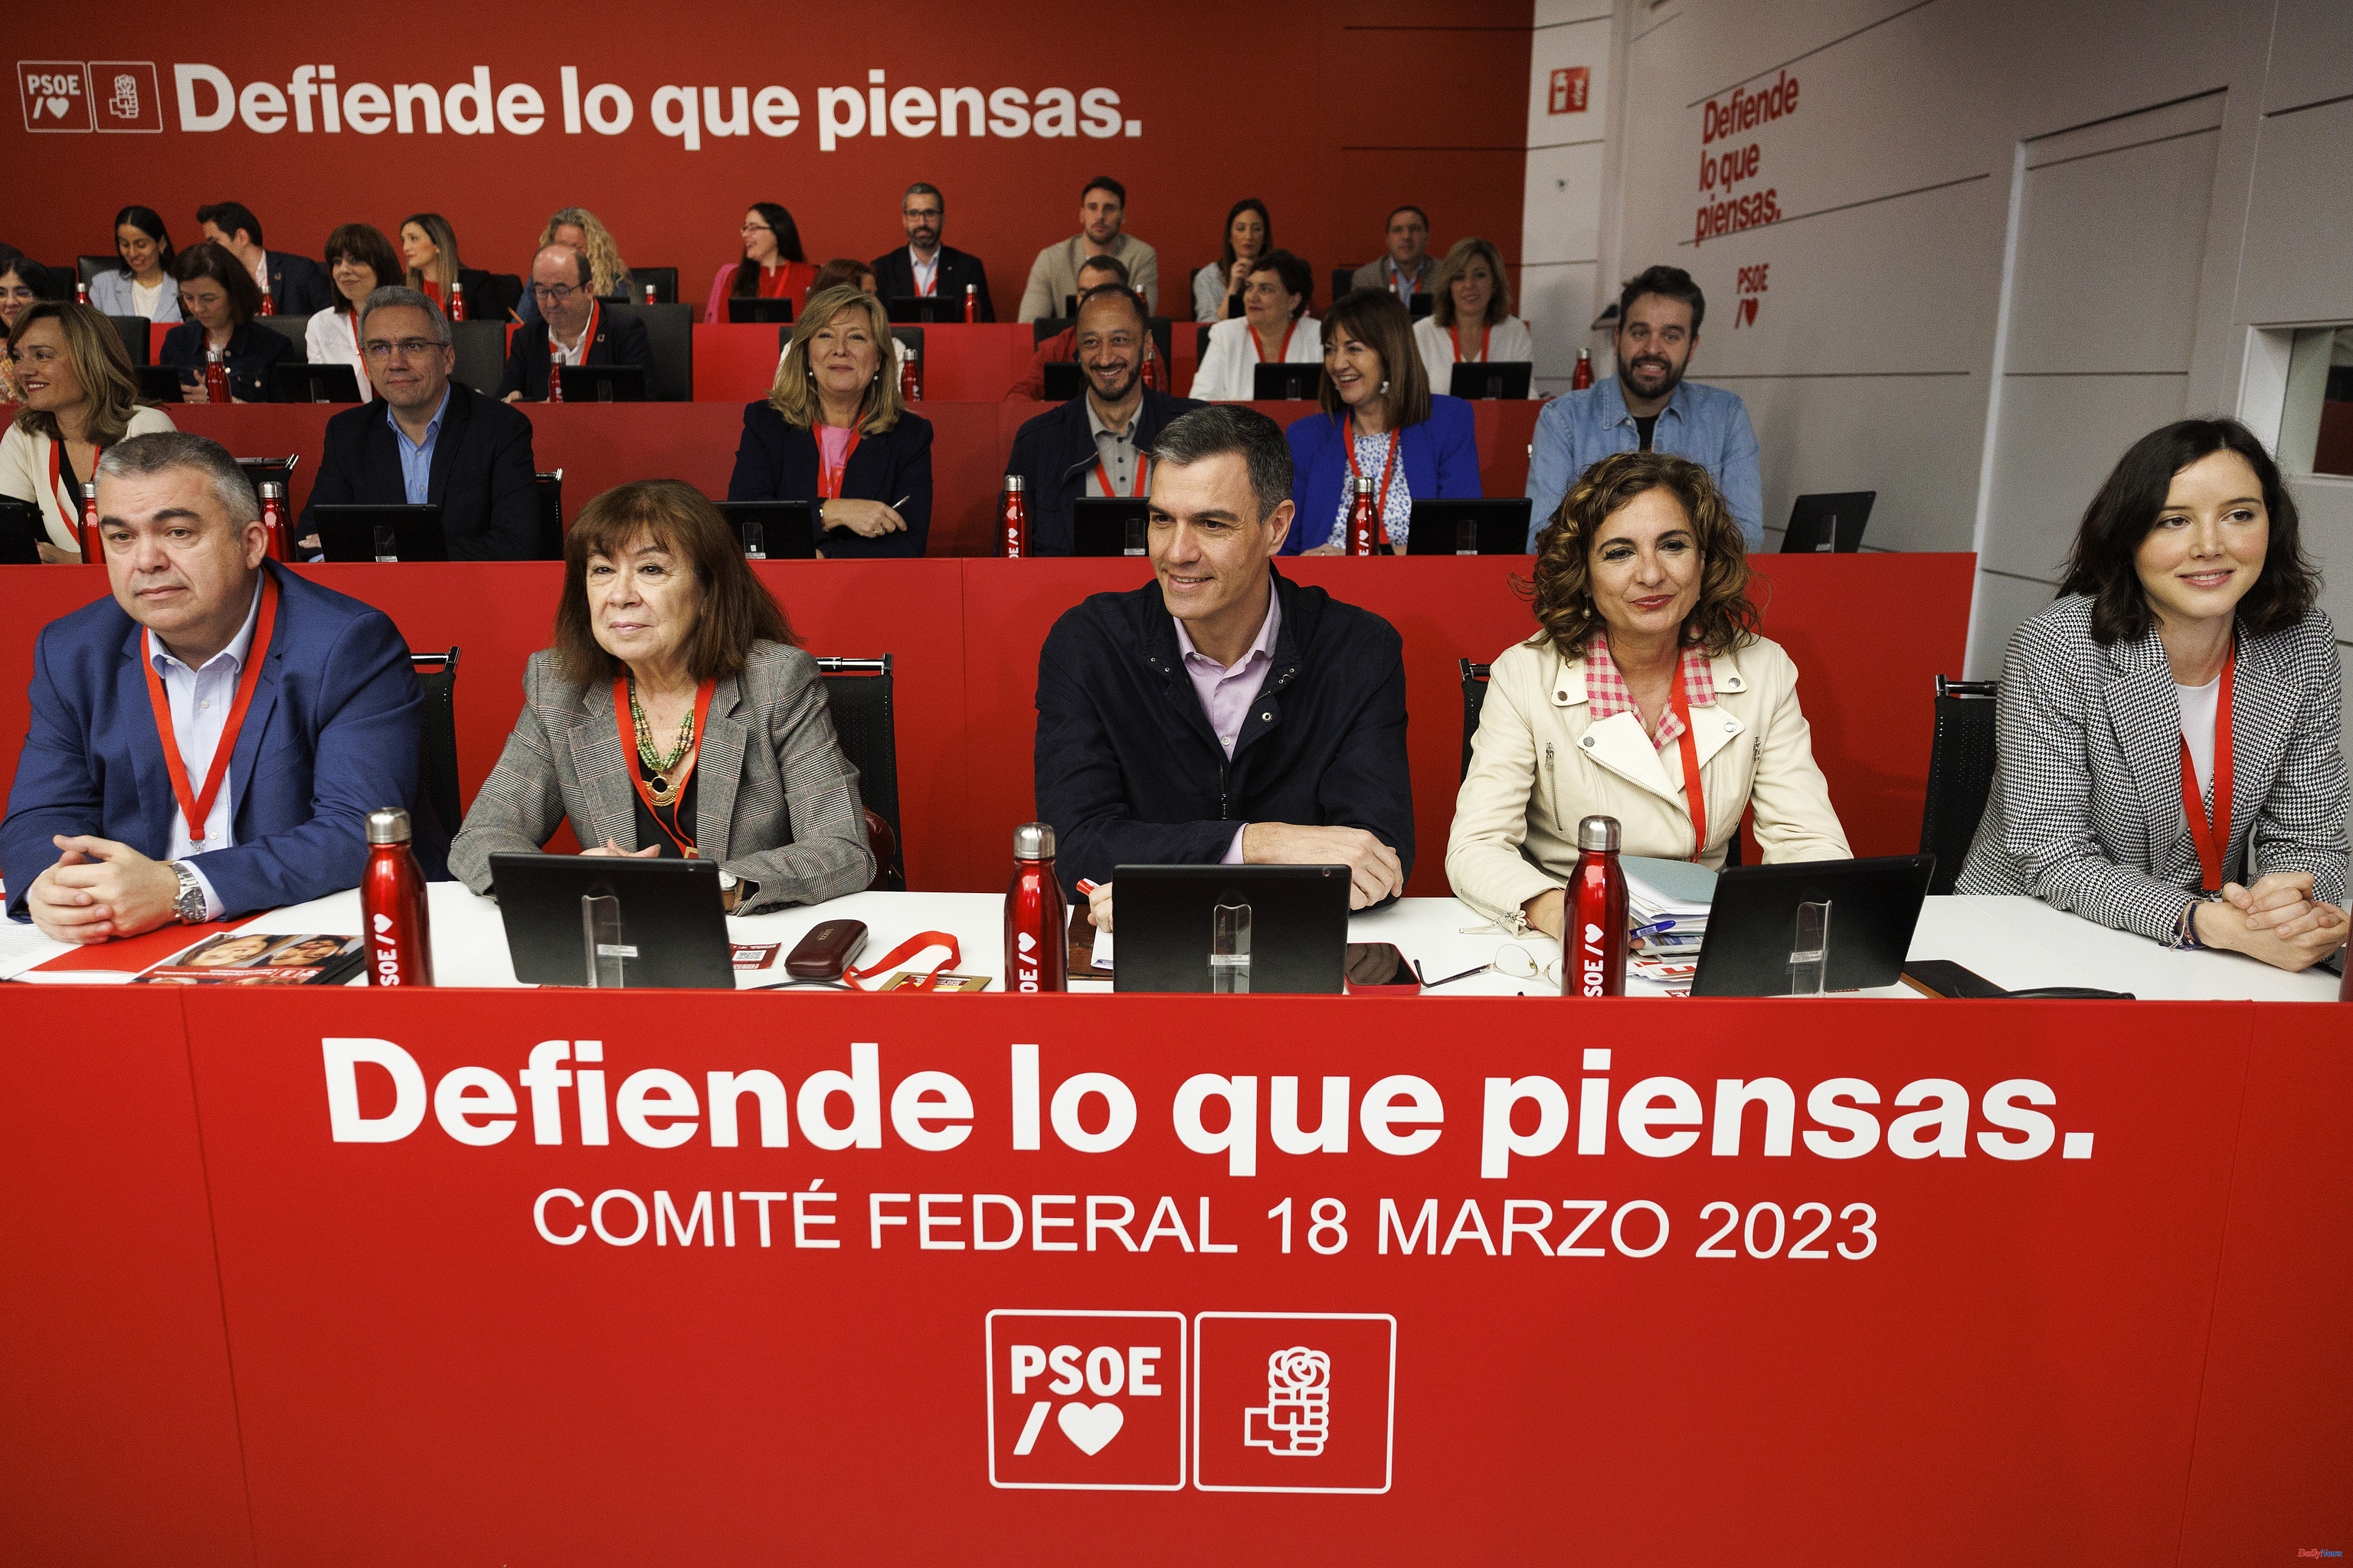 Politics Sánchez insists on encouraging fear of Vox: "Feijóo's project involves reissuing coalitions with the extreme right"